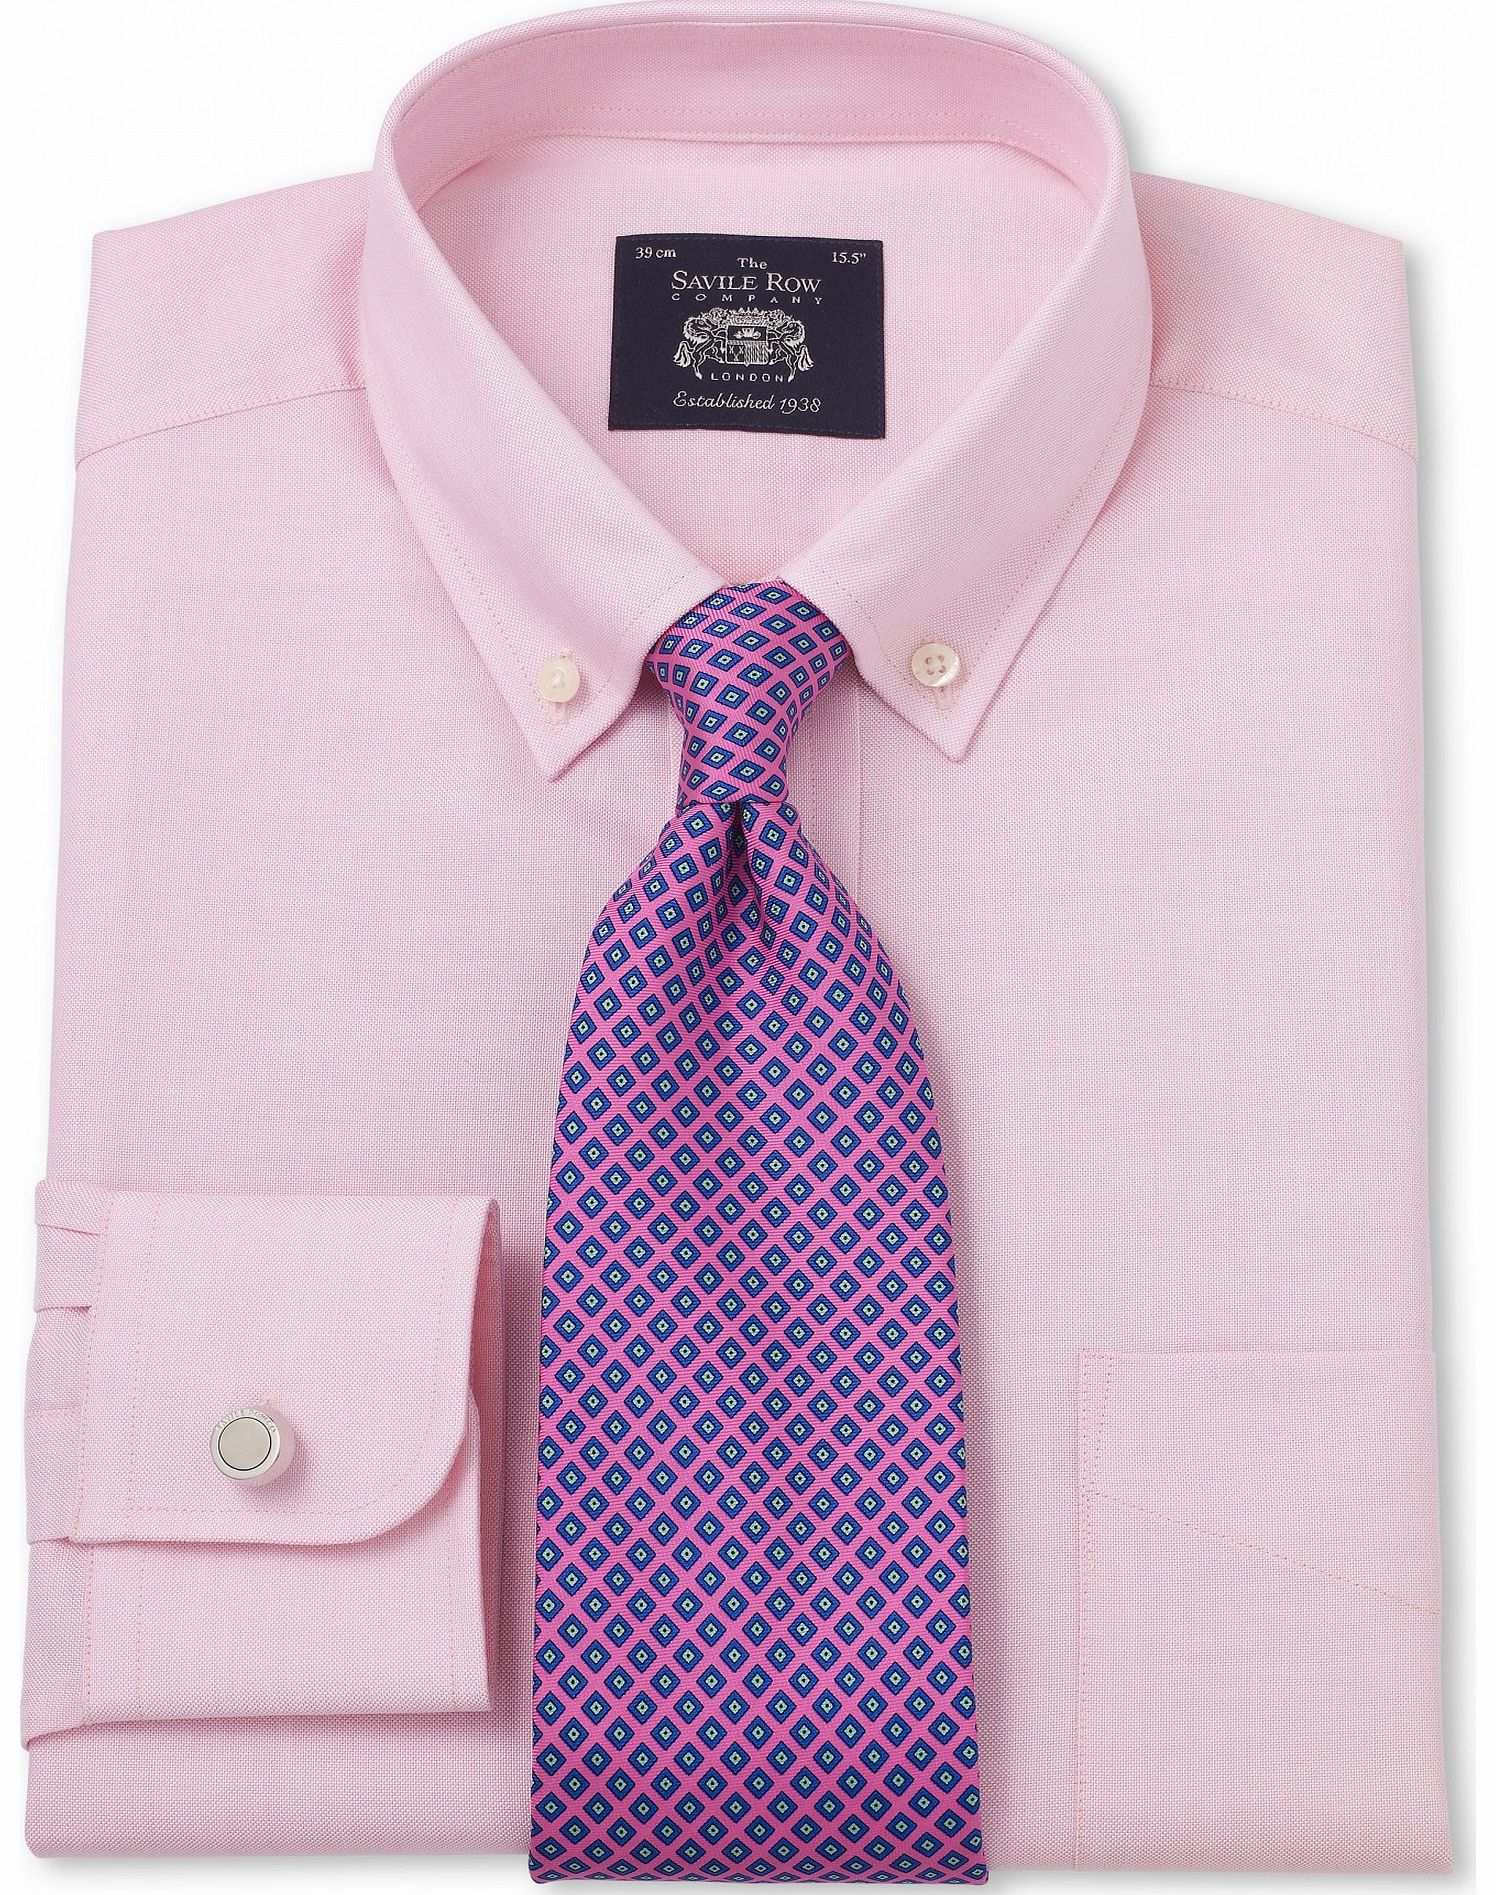 Savile Row Company Pink Pinpoint Classic Fit Shirt 18 1/2``